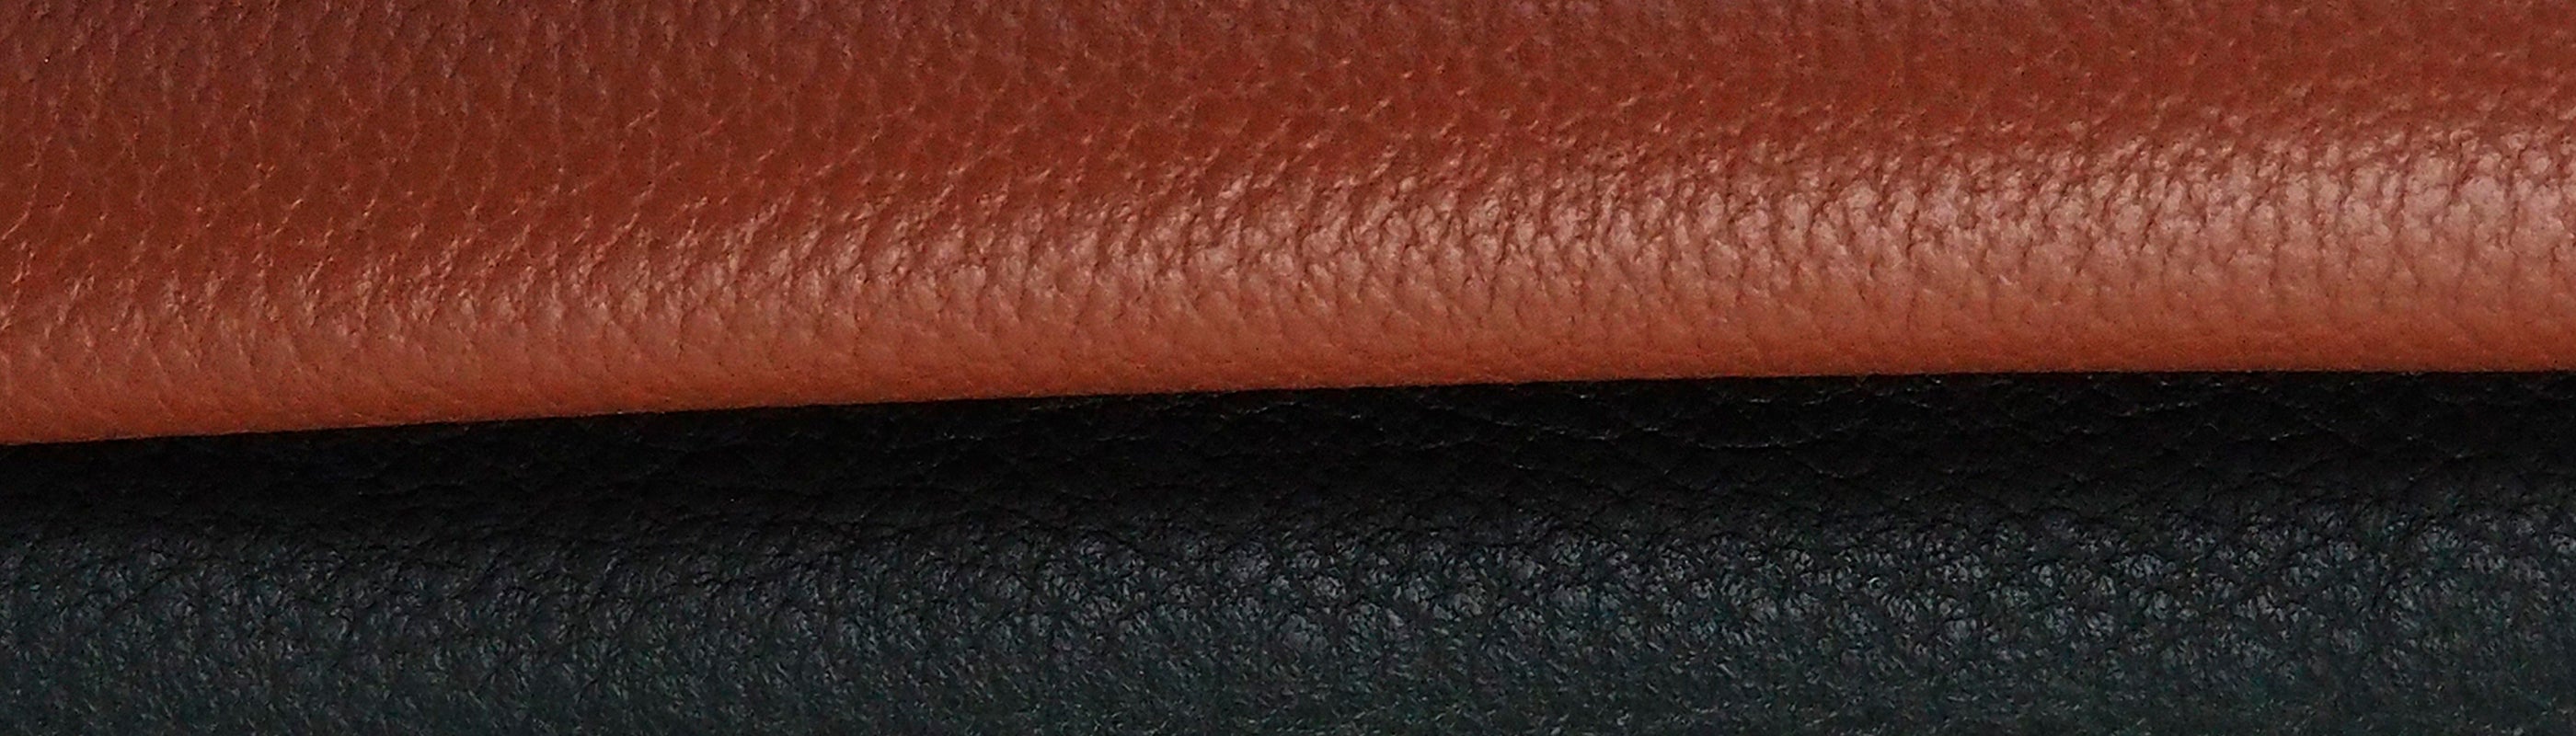 Our full grain leather articles